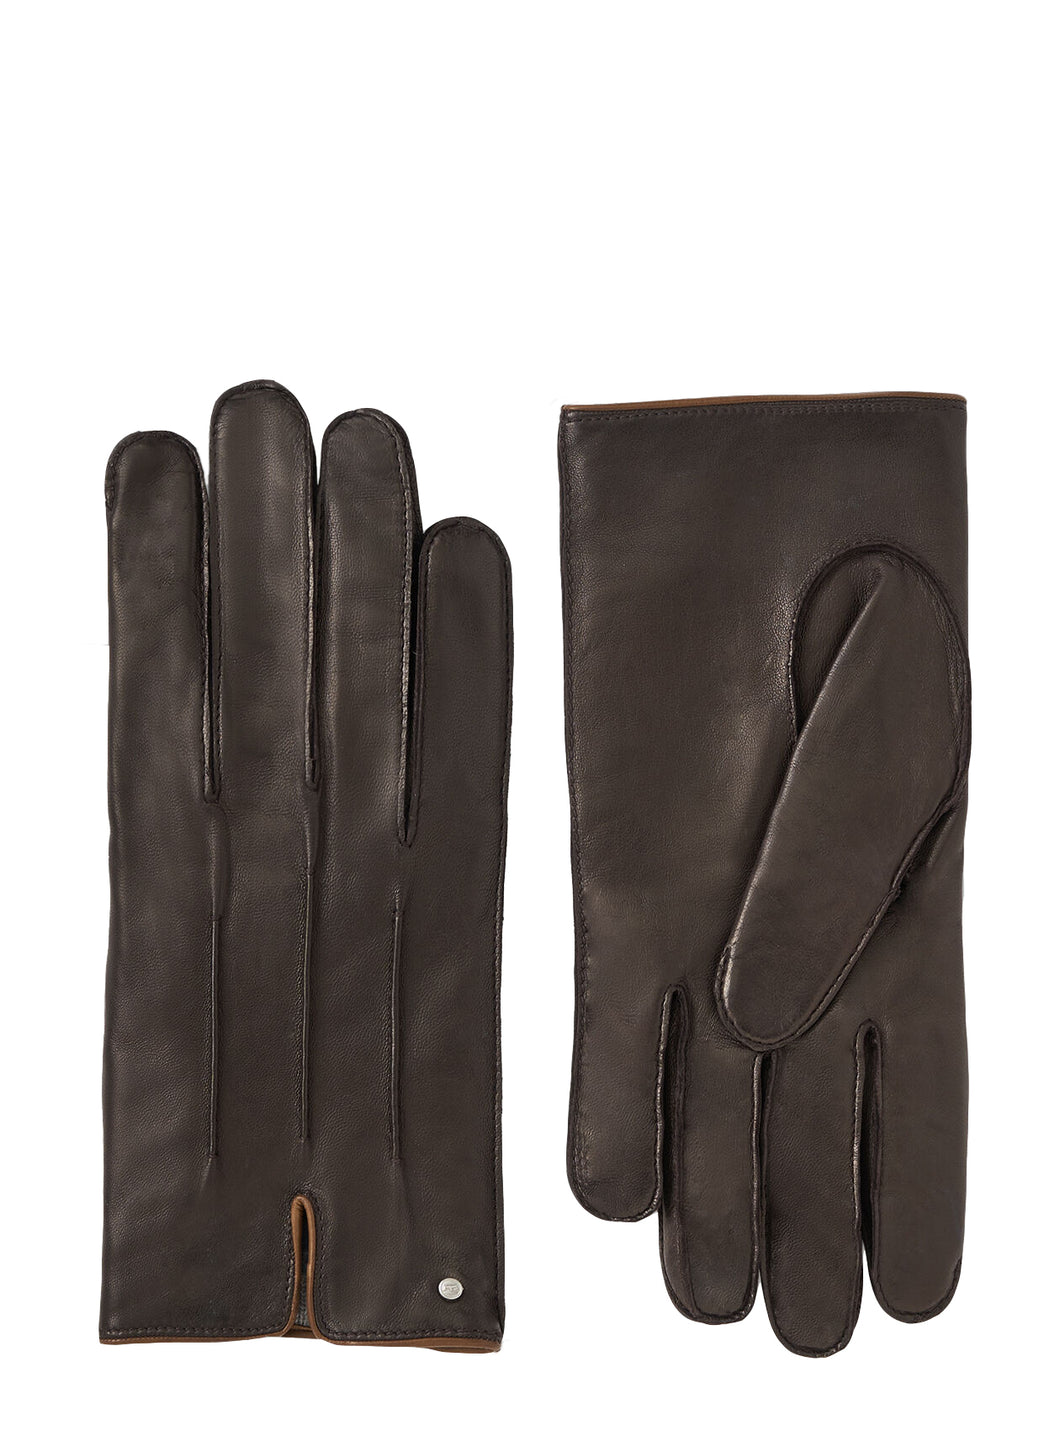 Peter Millar Collection Calfskin Nappa Leather Gloves